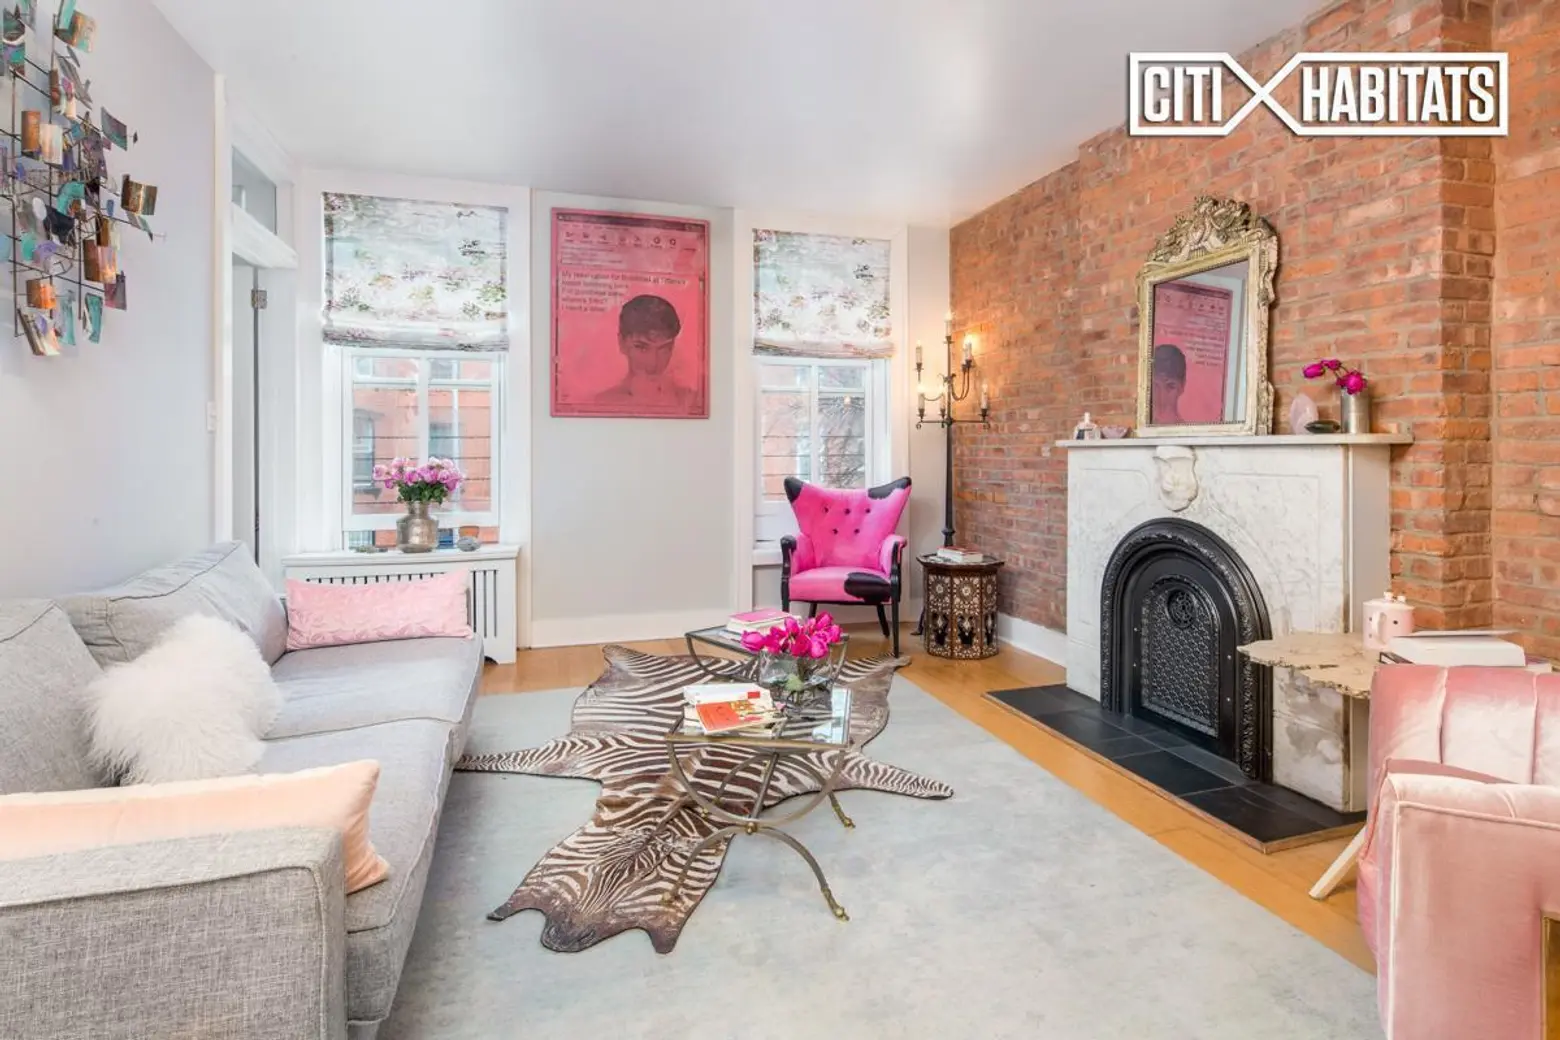 Parlor floor pad offers brownstone beauty without the beastly mortgage at $4,300/month